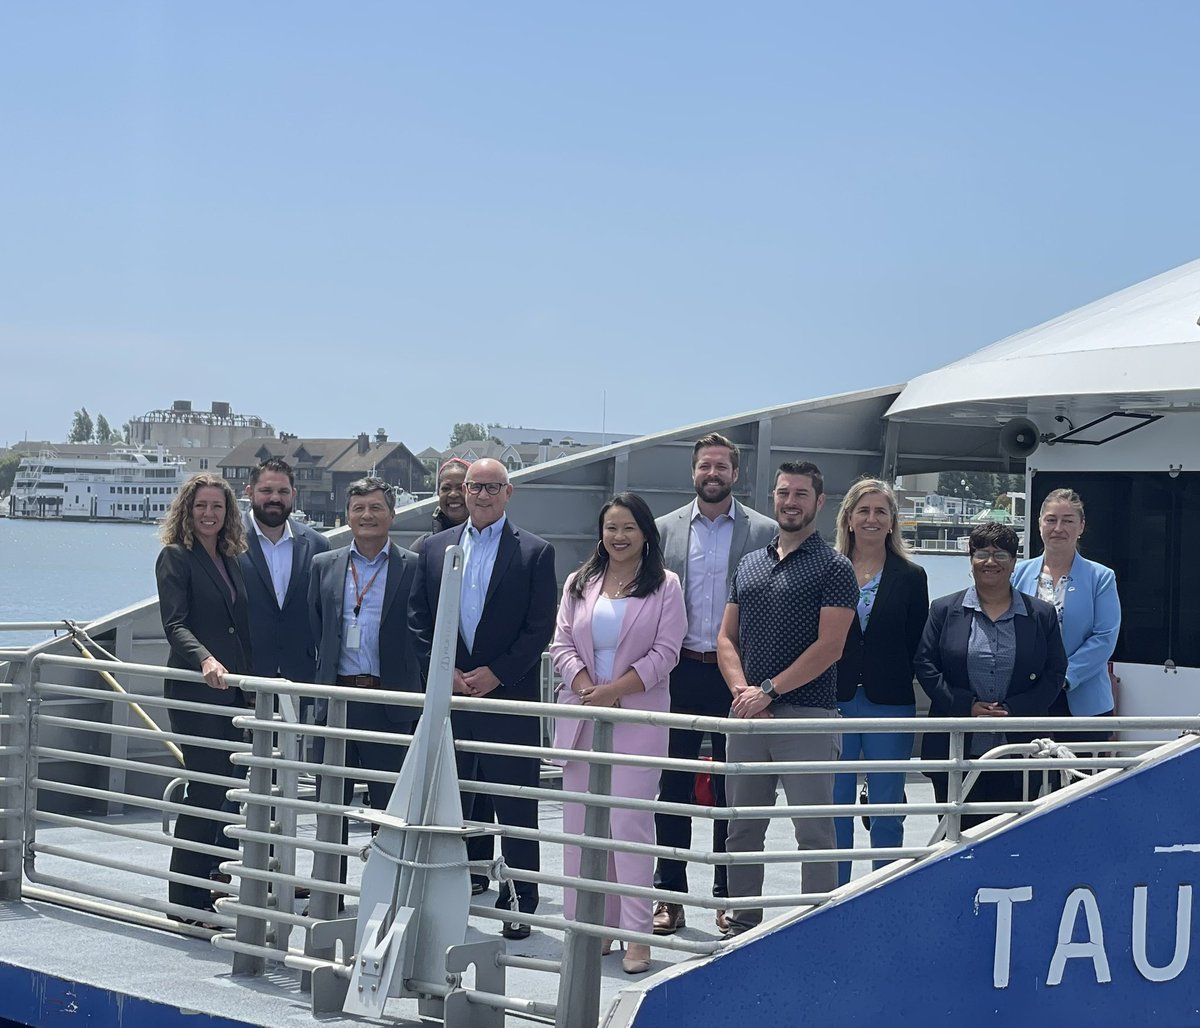 The East Bay is leading the way for innovative and continued safe modes of public transportation that allows our #AD18 communities to live and breathe healthy in our neighborhoods. Thank you @Oakland @AlamedaCTC @SFBayFerry and regional community leaders!